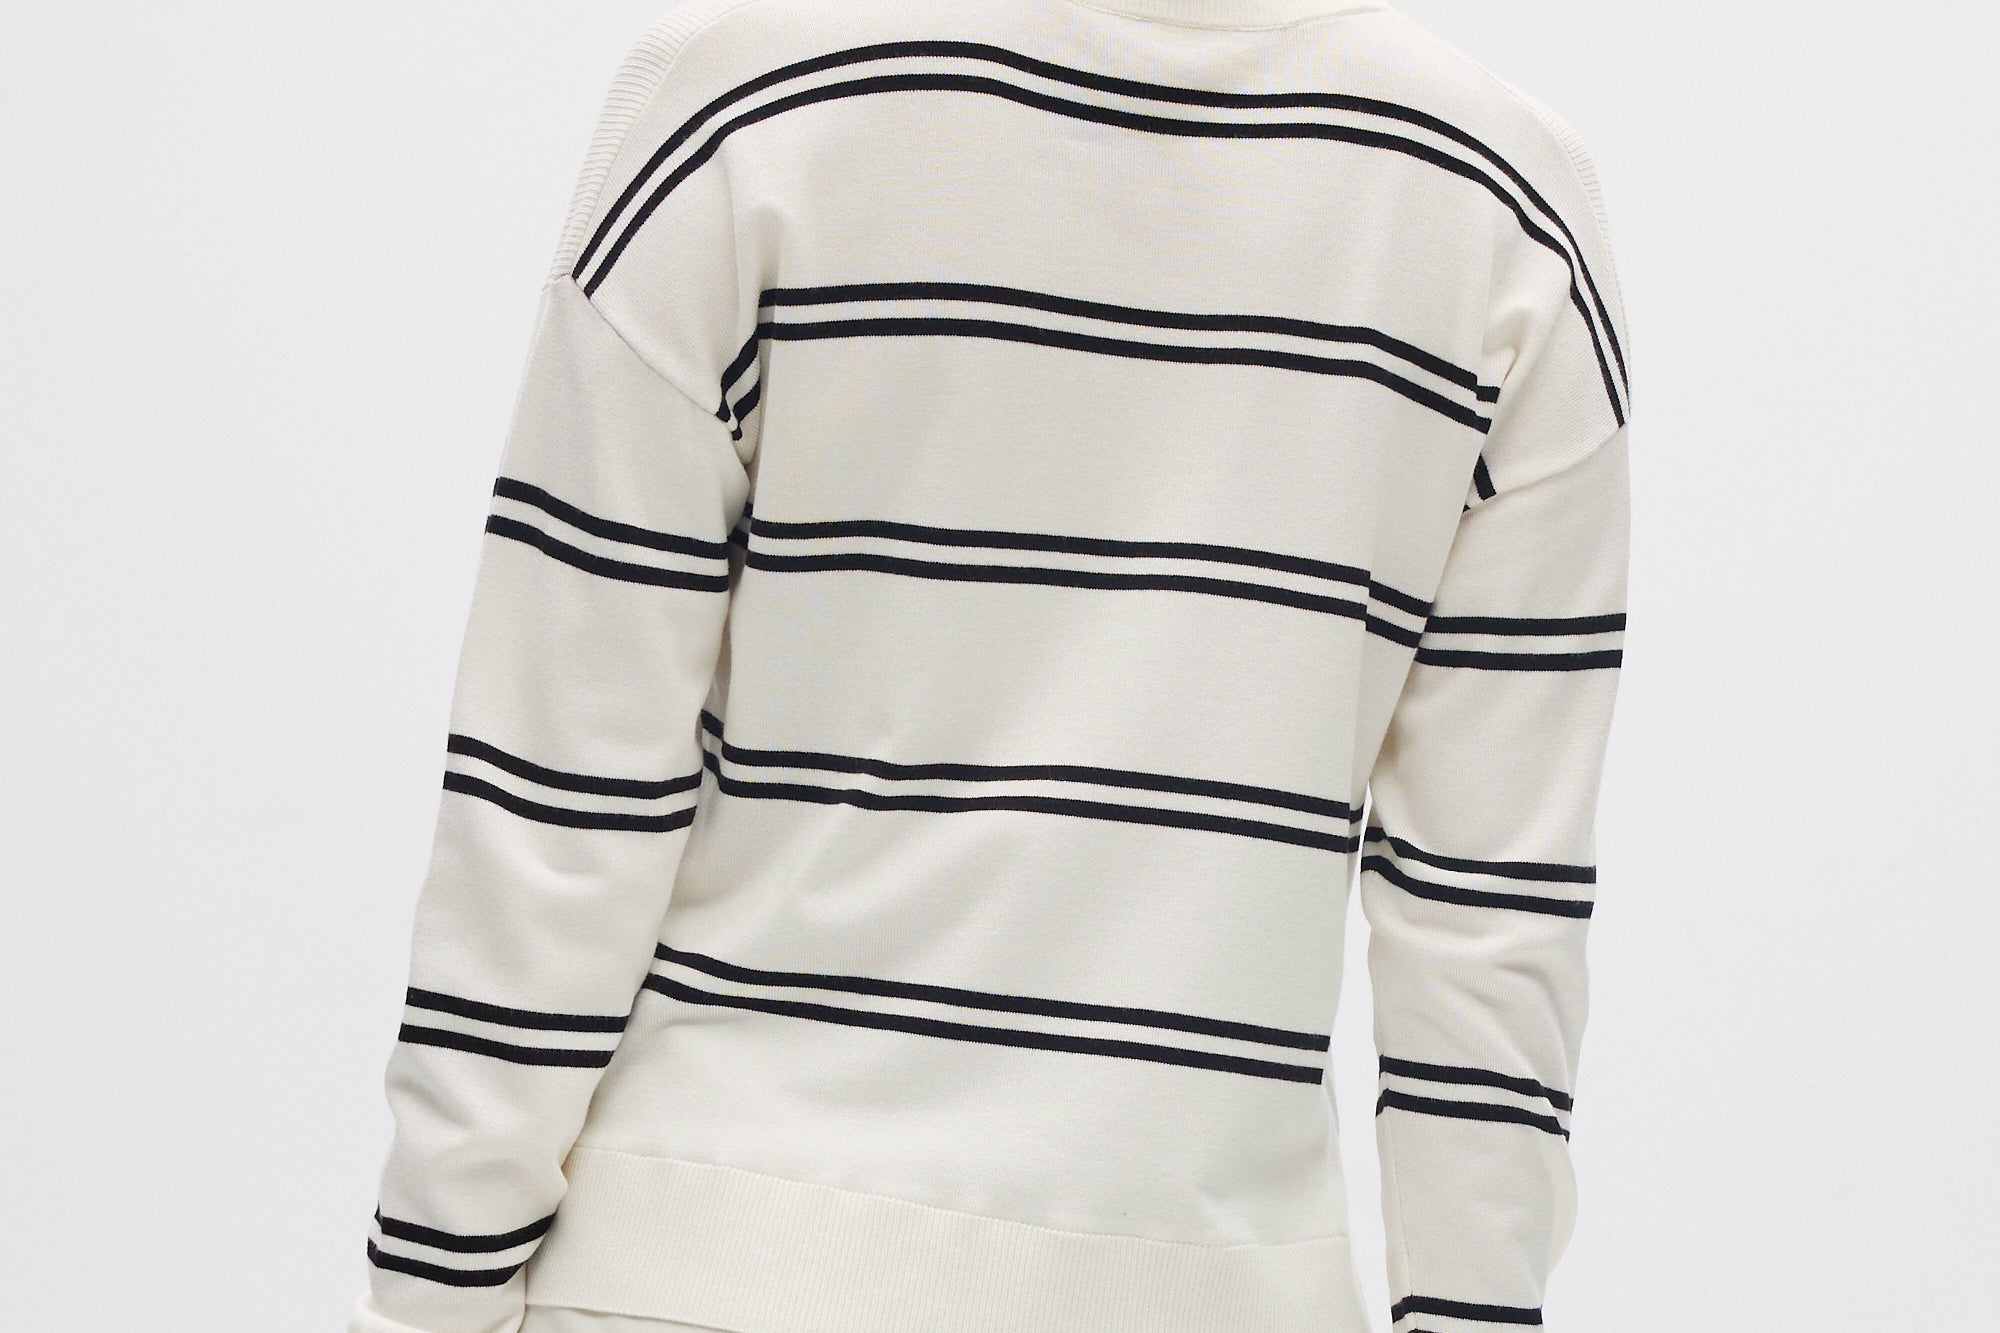 Off White V-neck Sweater Top Combo back